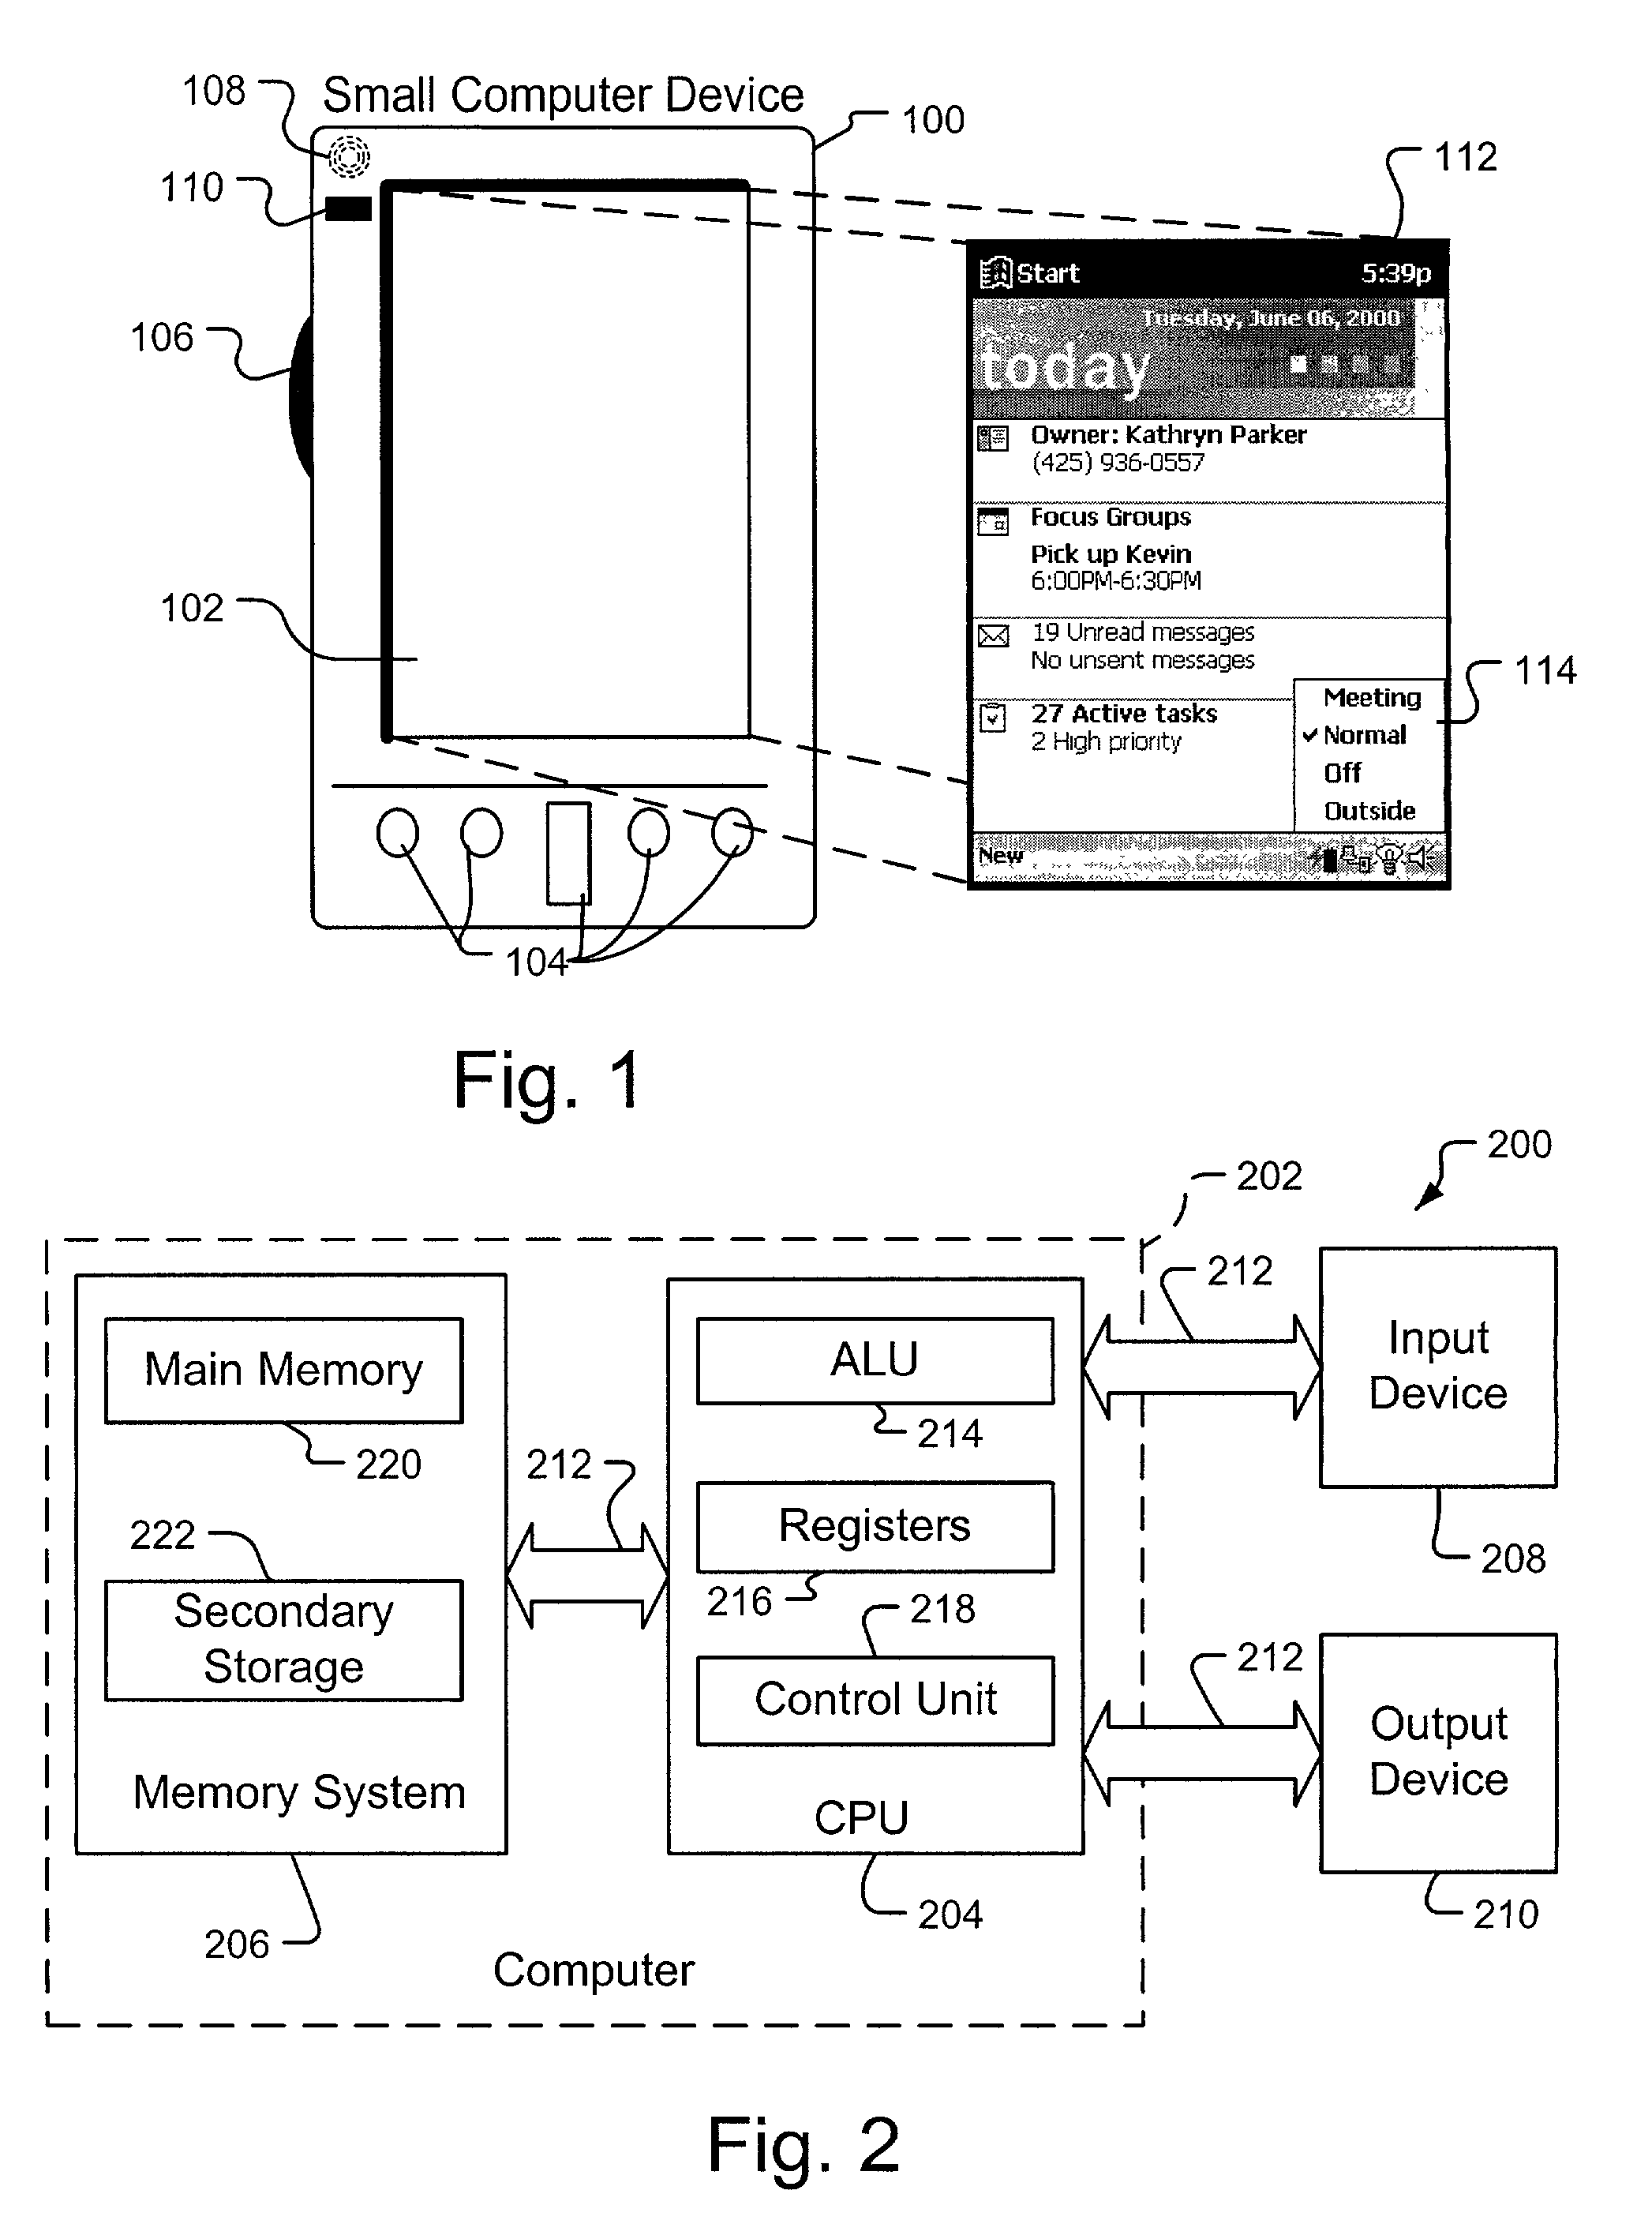 System and method for optimizing user notifications for small computer devices